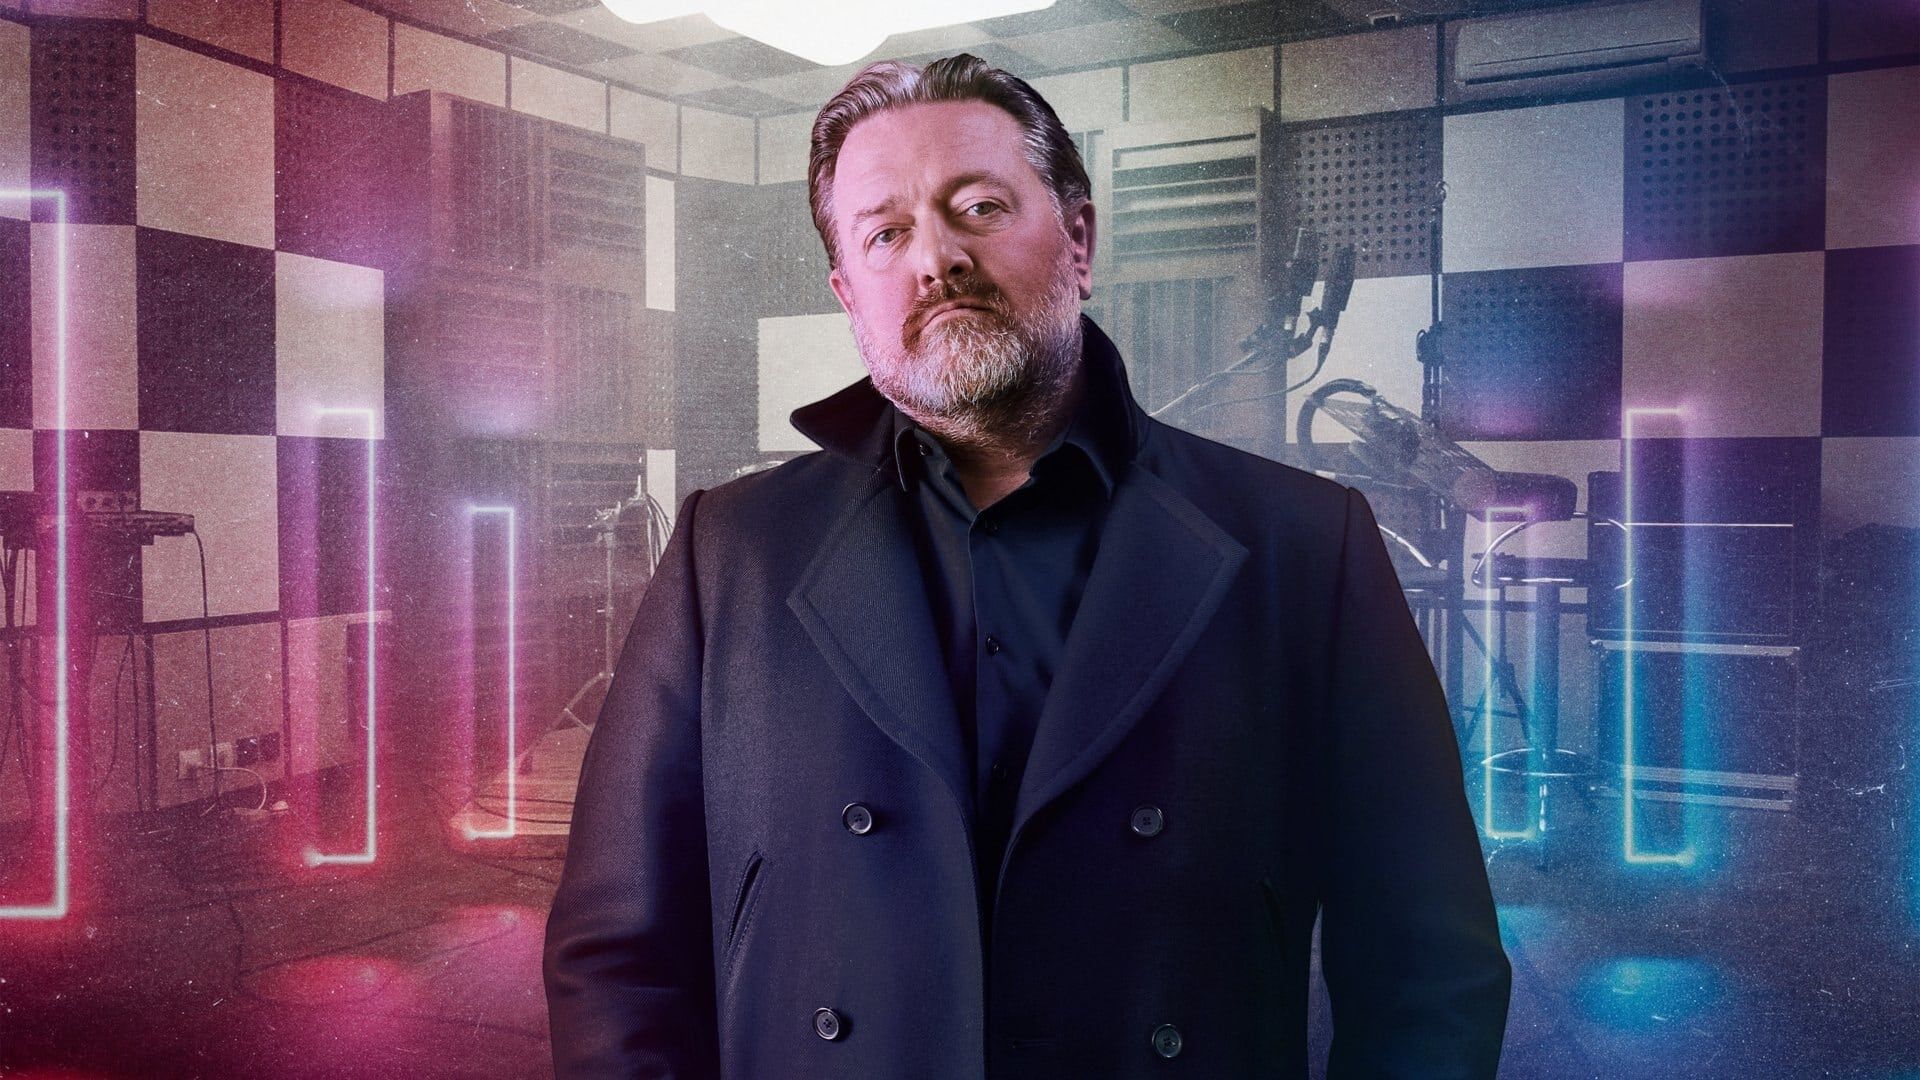 Guy Garvey: From the Vaults background